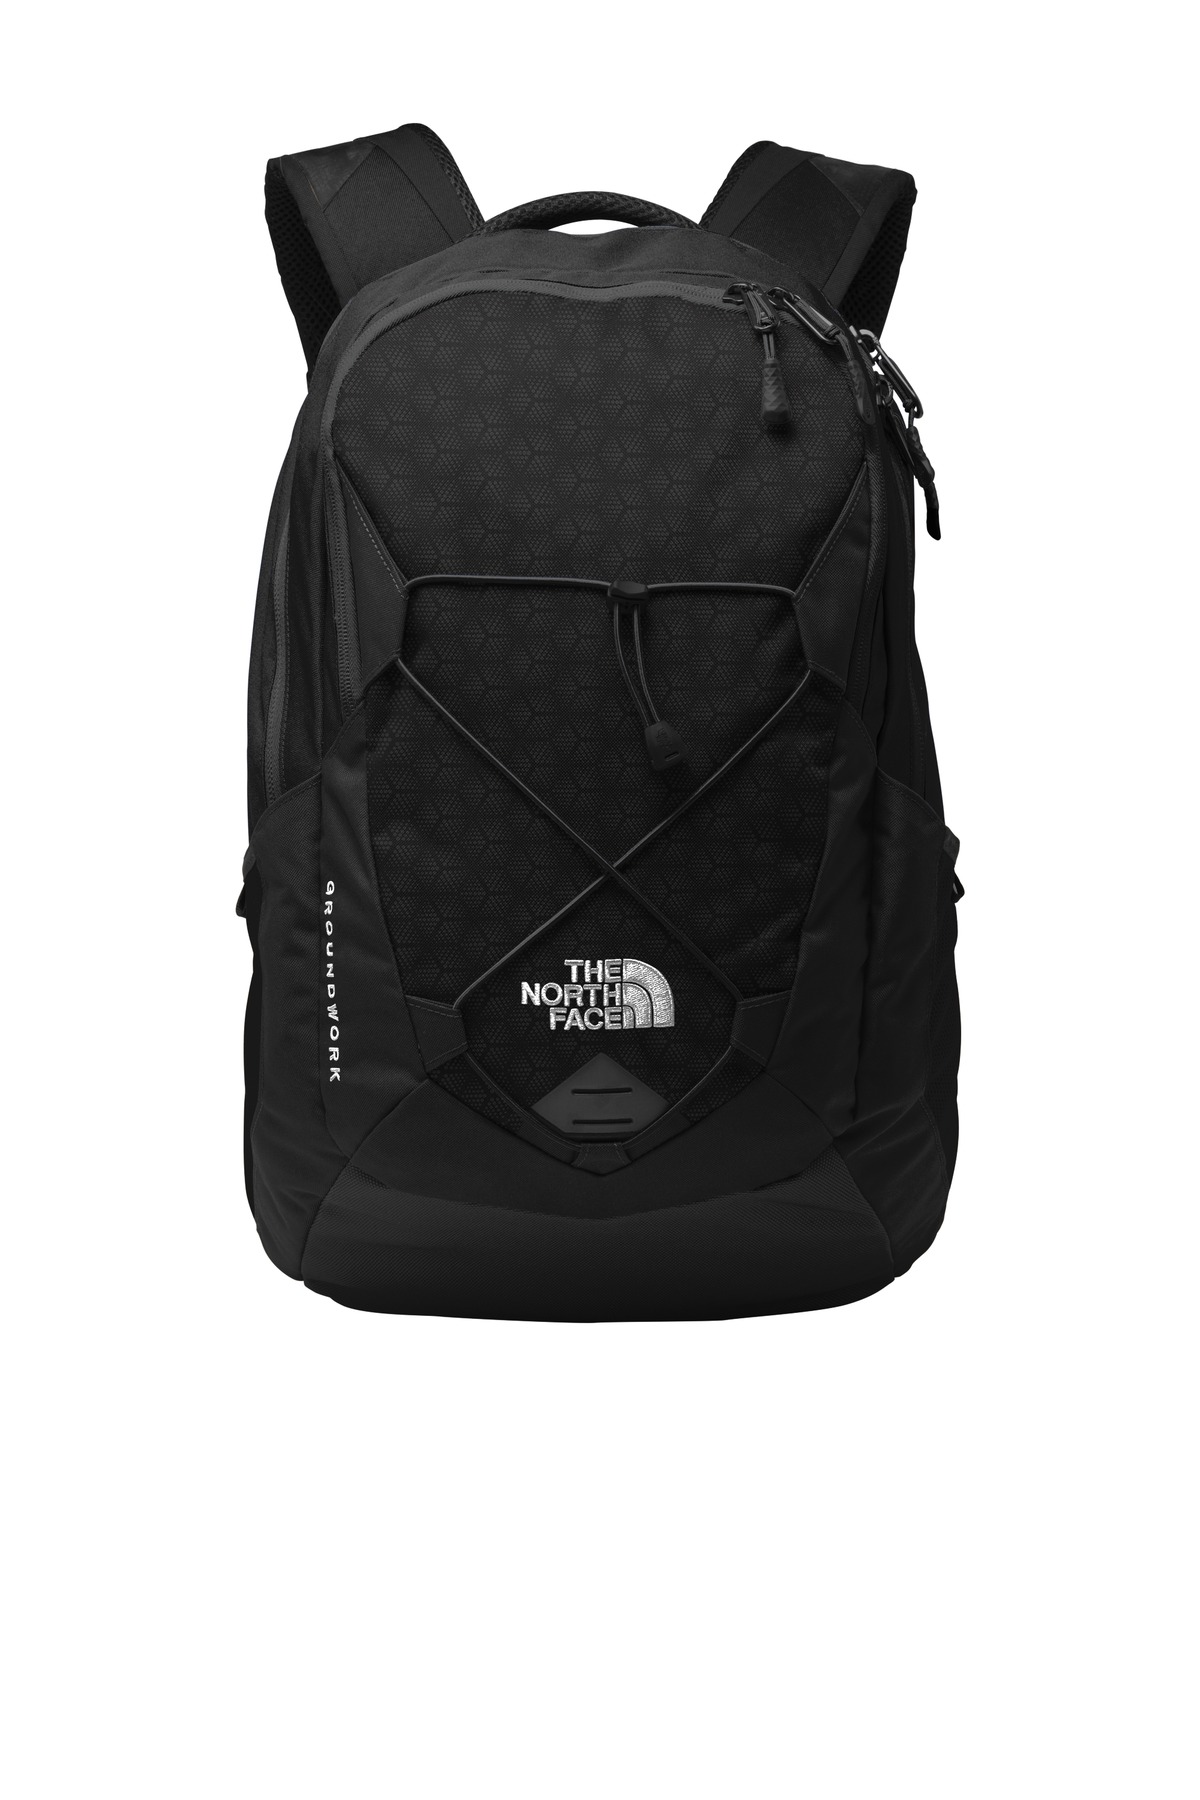 The North Face Groundwork Backpack-